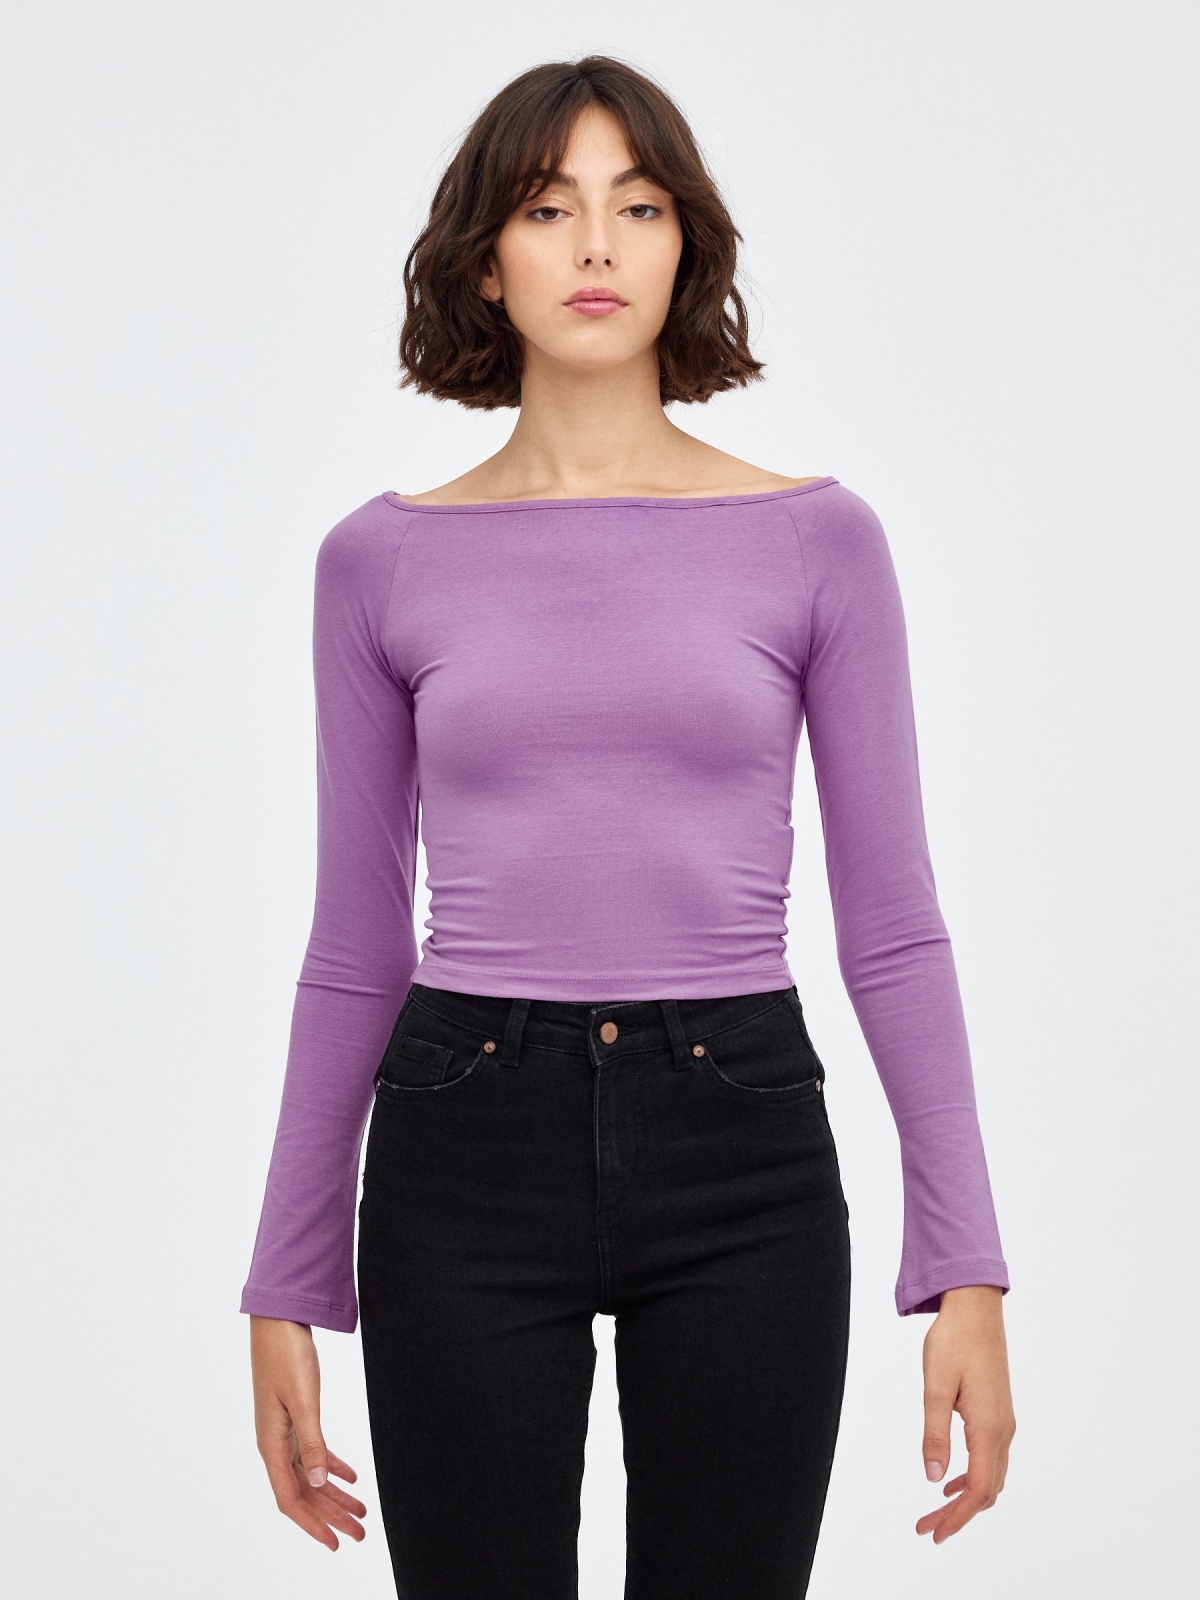 Raglan sleeve t-shirt purple middle front view